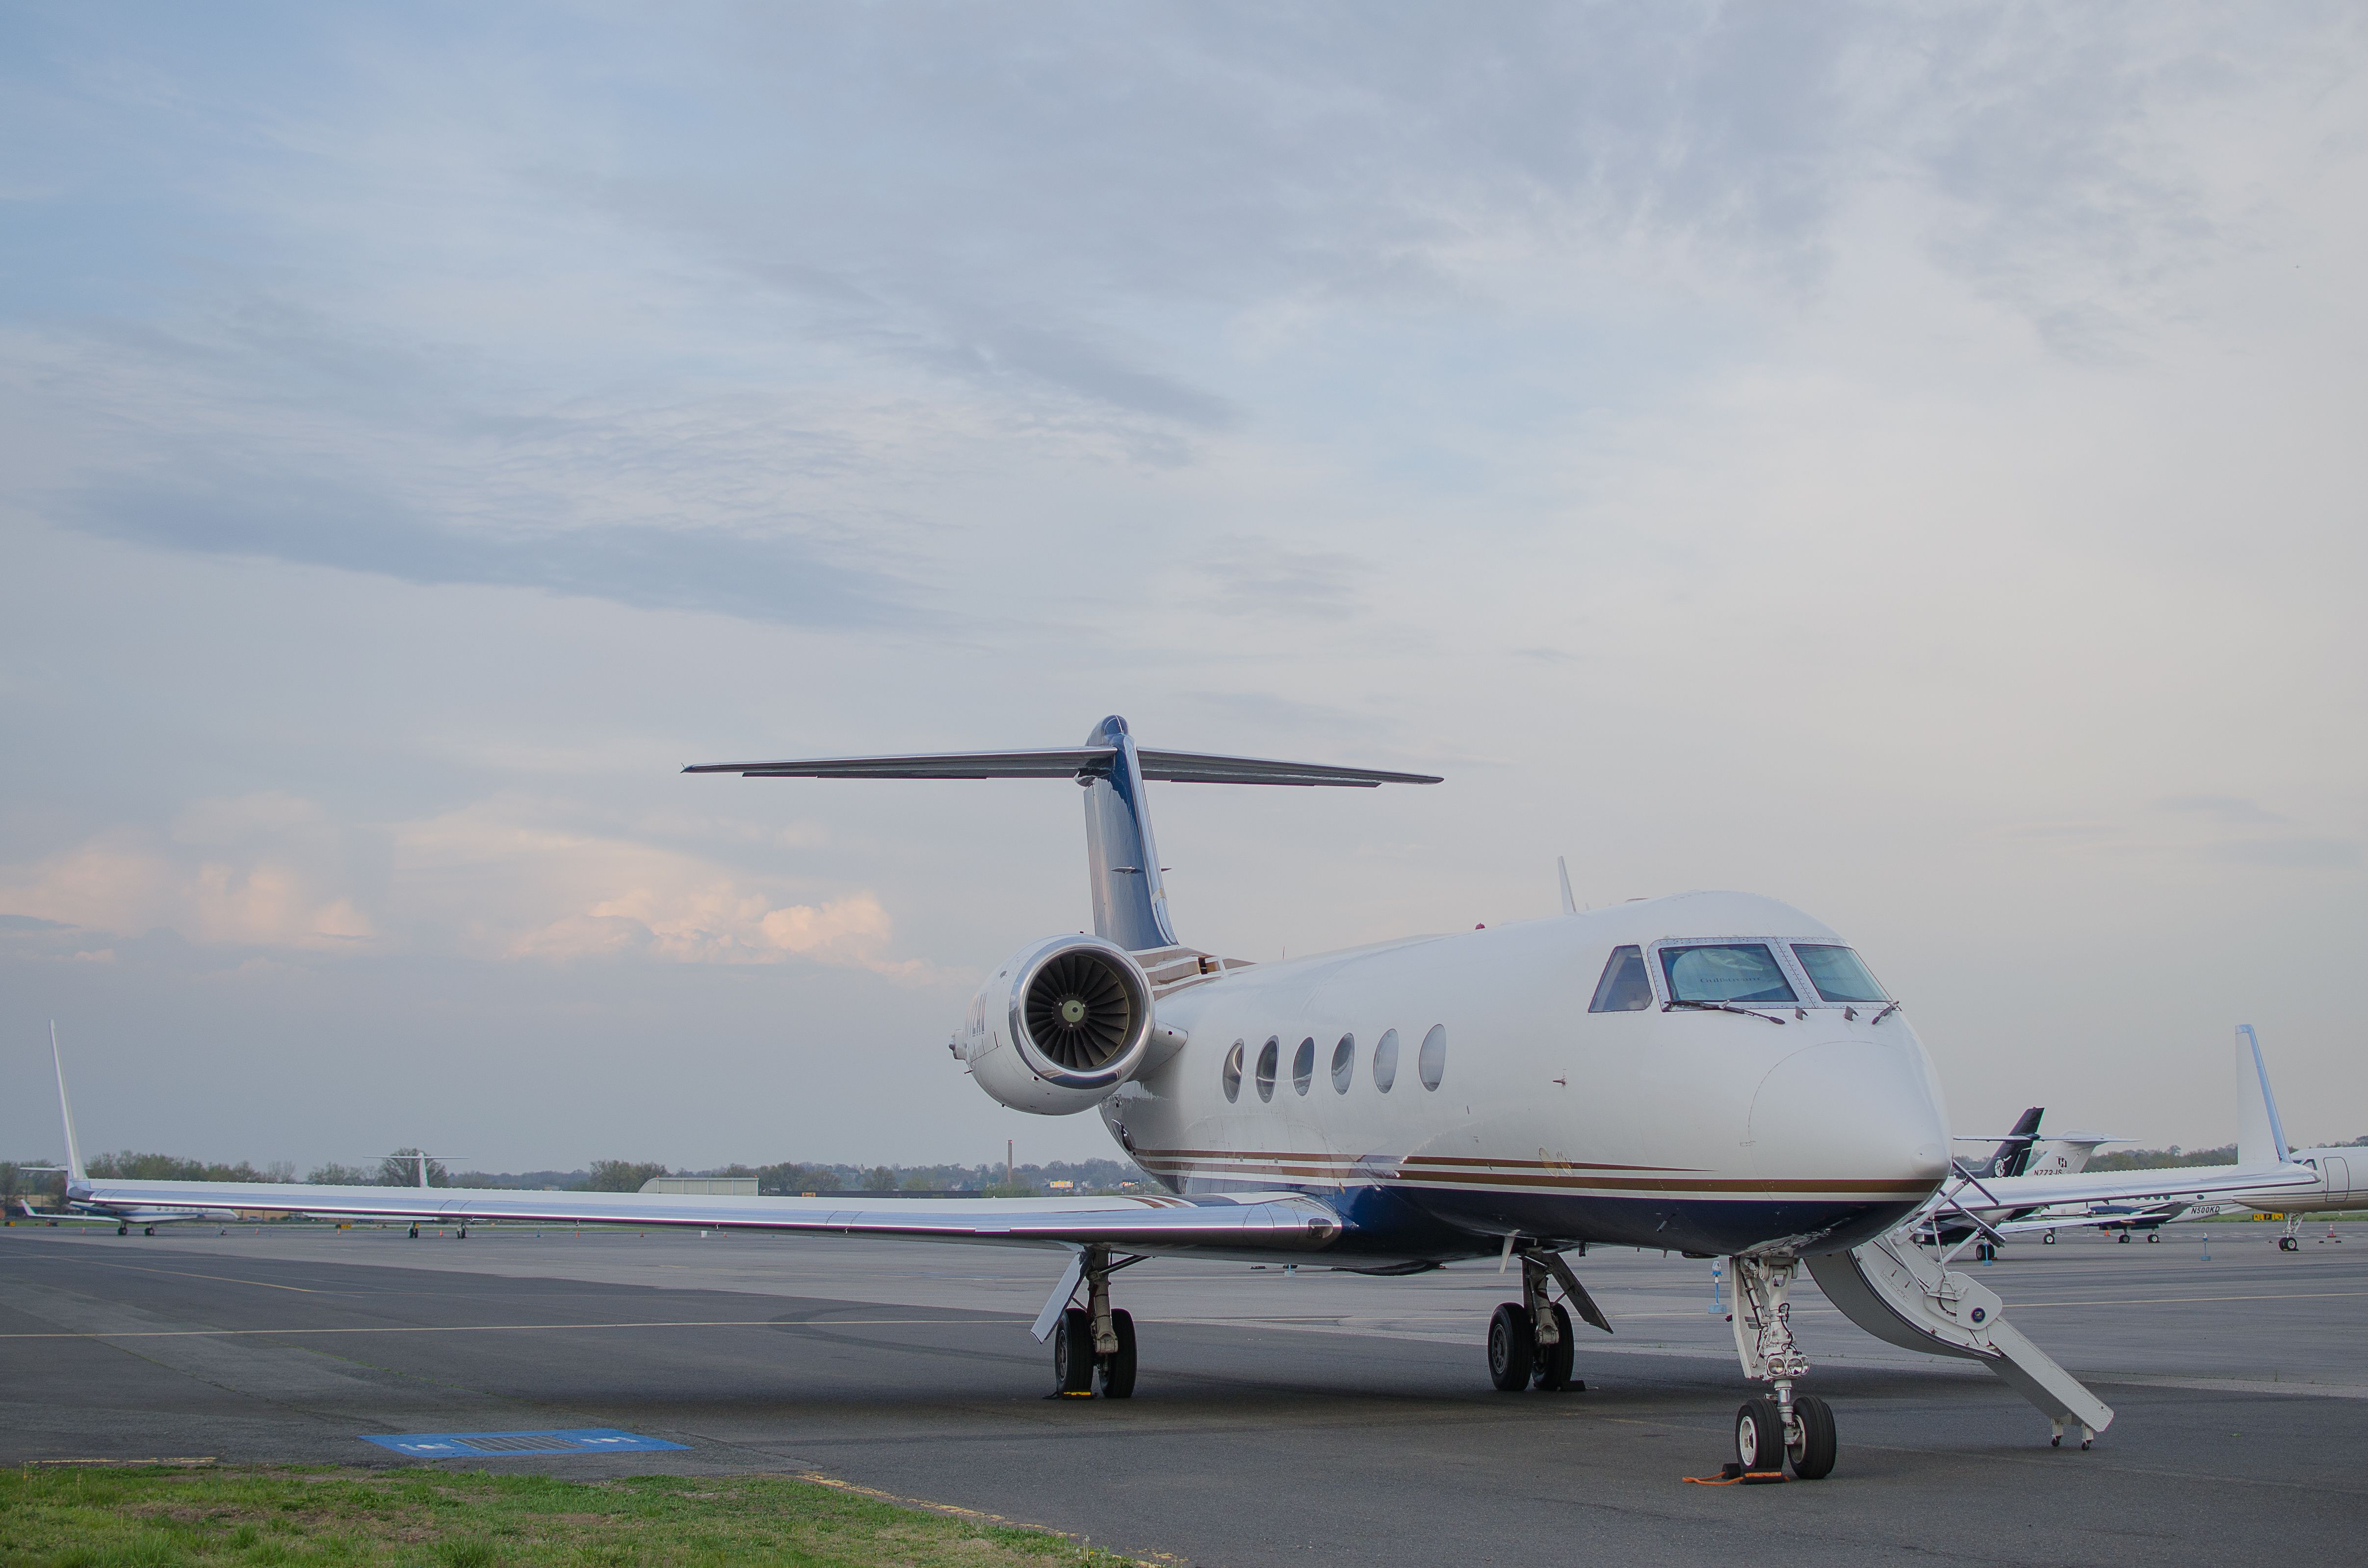 A Business Jet parked at Teterboro Airport.